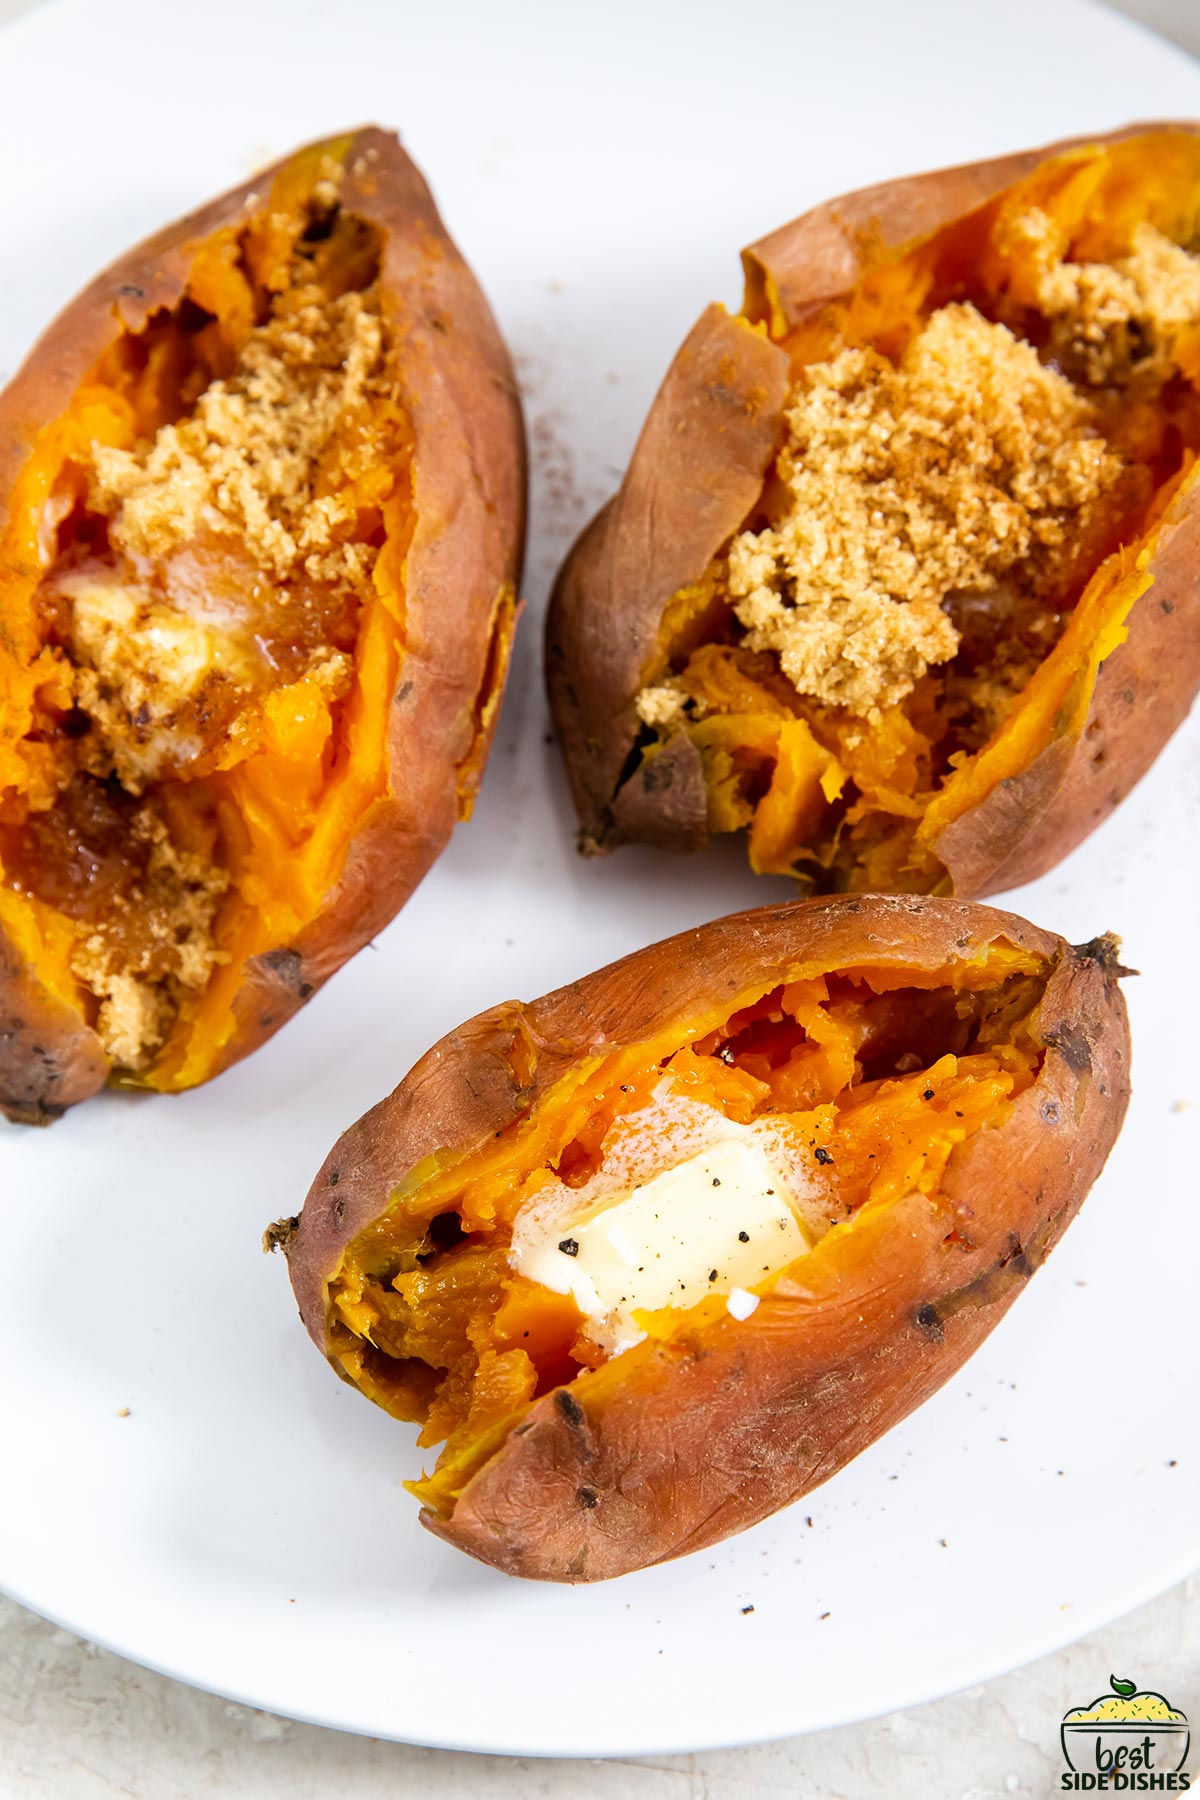 a plate with four sweet potatoes with different fillings in each one: one with butter, one with brown sugar and one with brown sugar and cinnamon